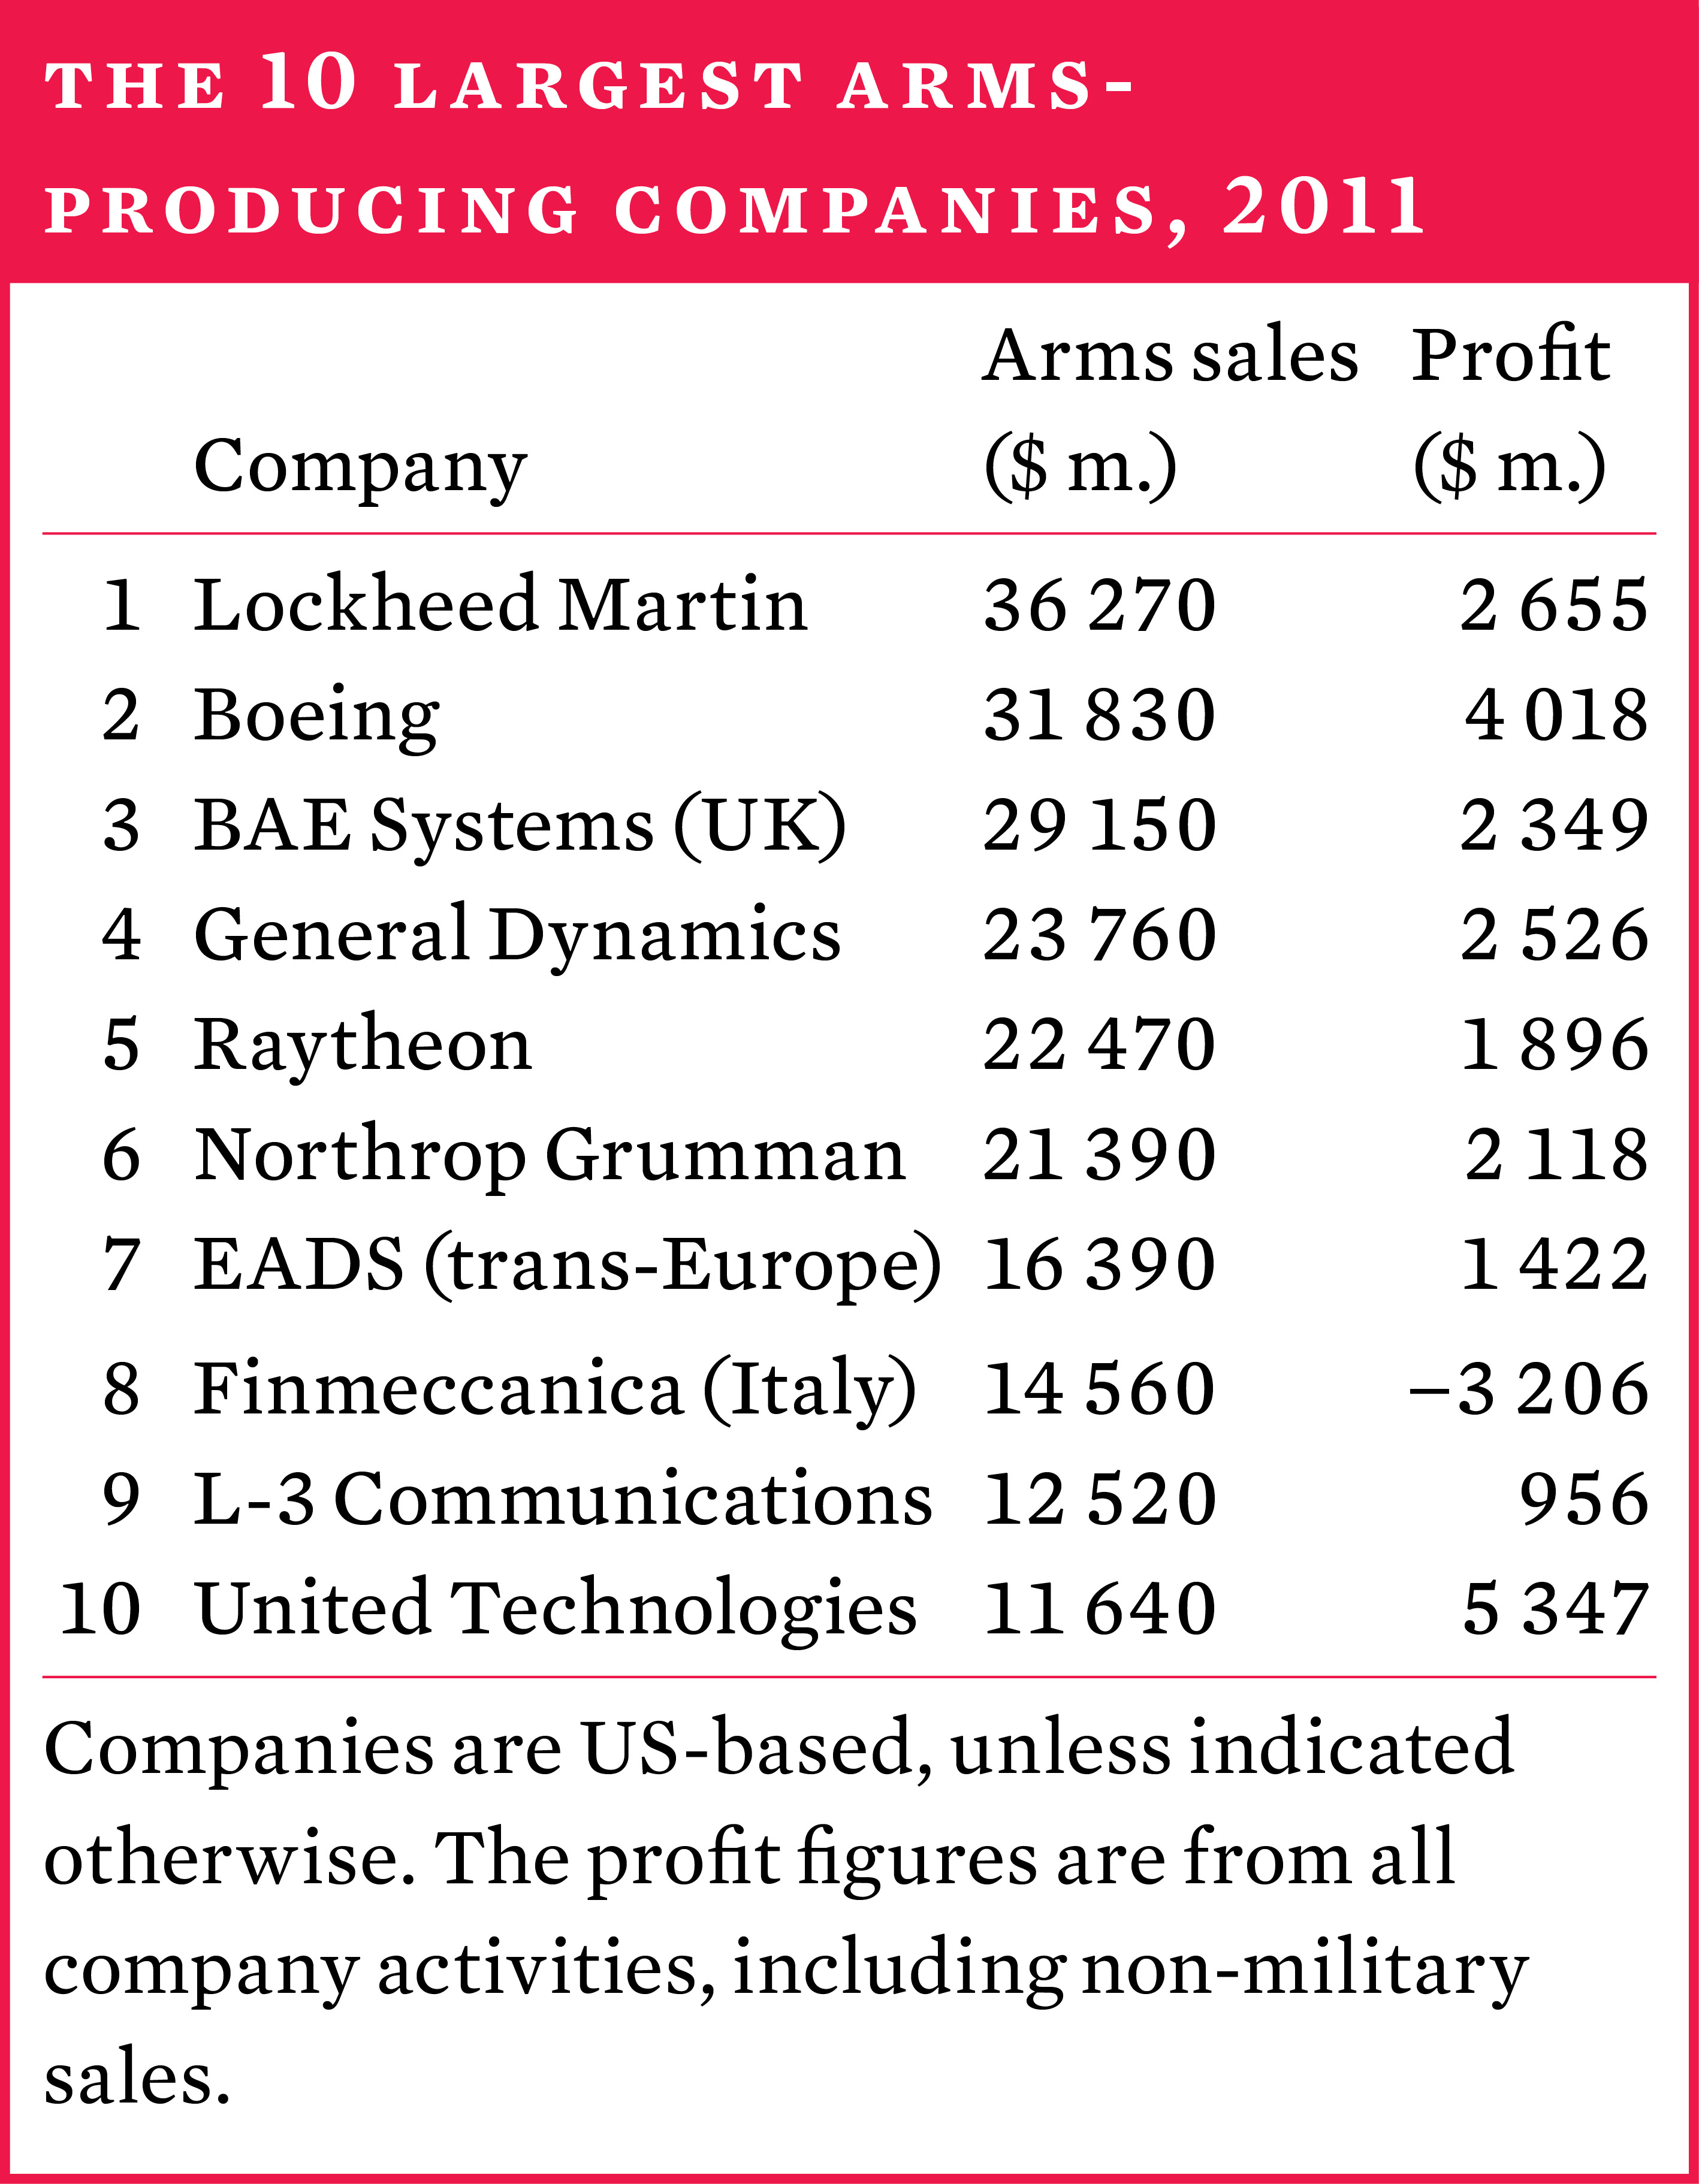 The 10 largest arms-producing companies, 2011